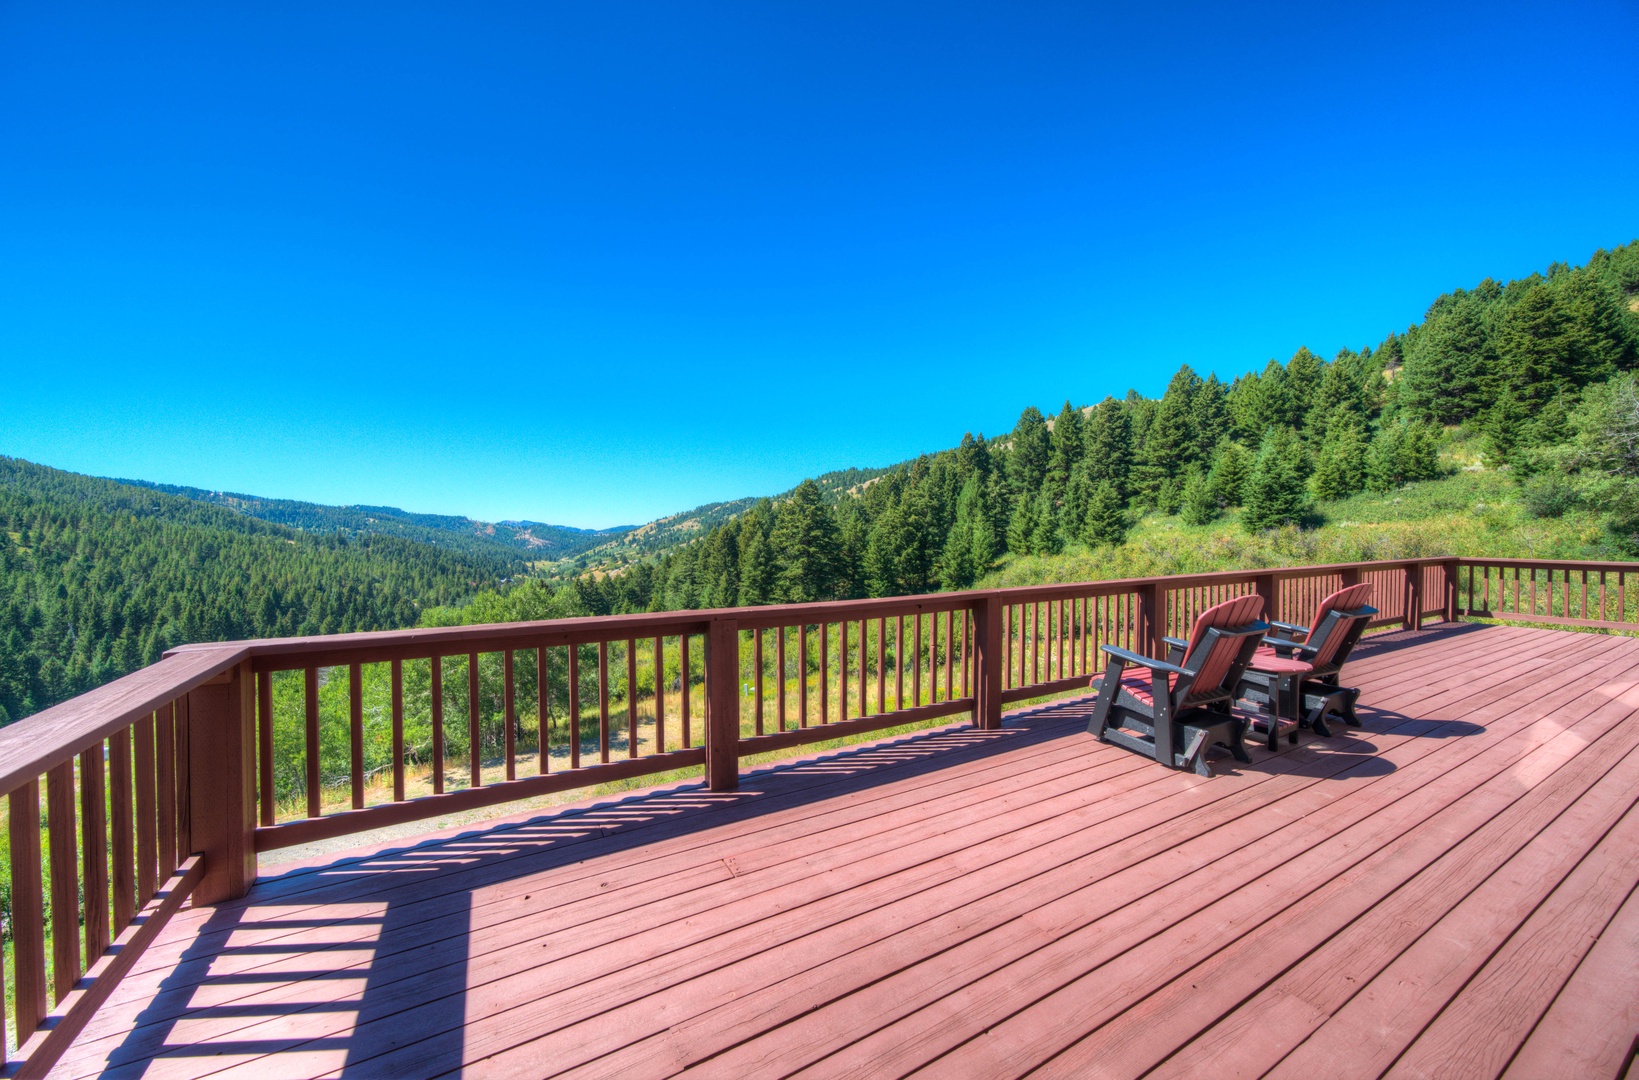 Bozeman Vacation Rentals, The Canyon Lookout - The perfect place for evening beverages